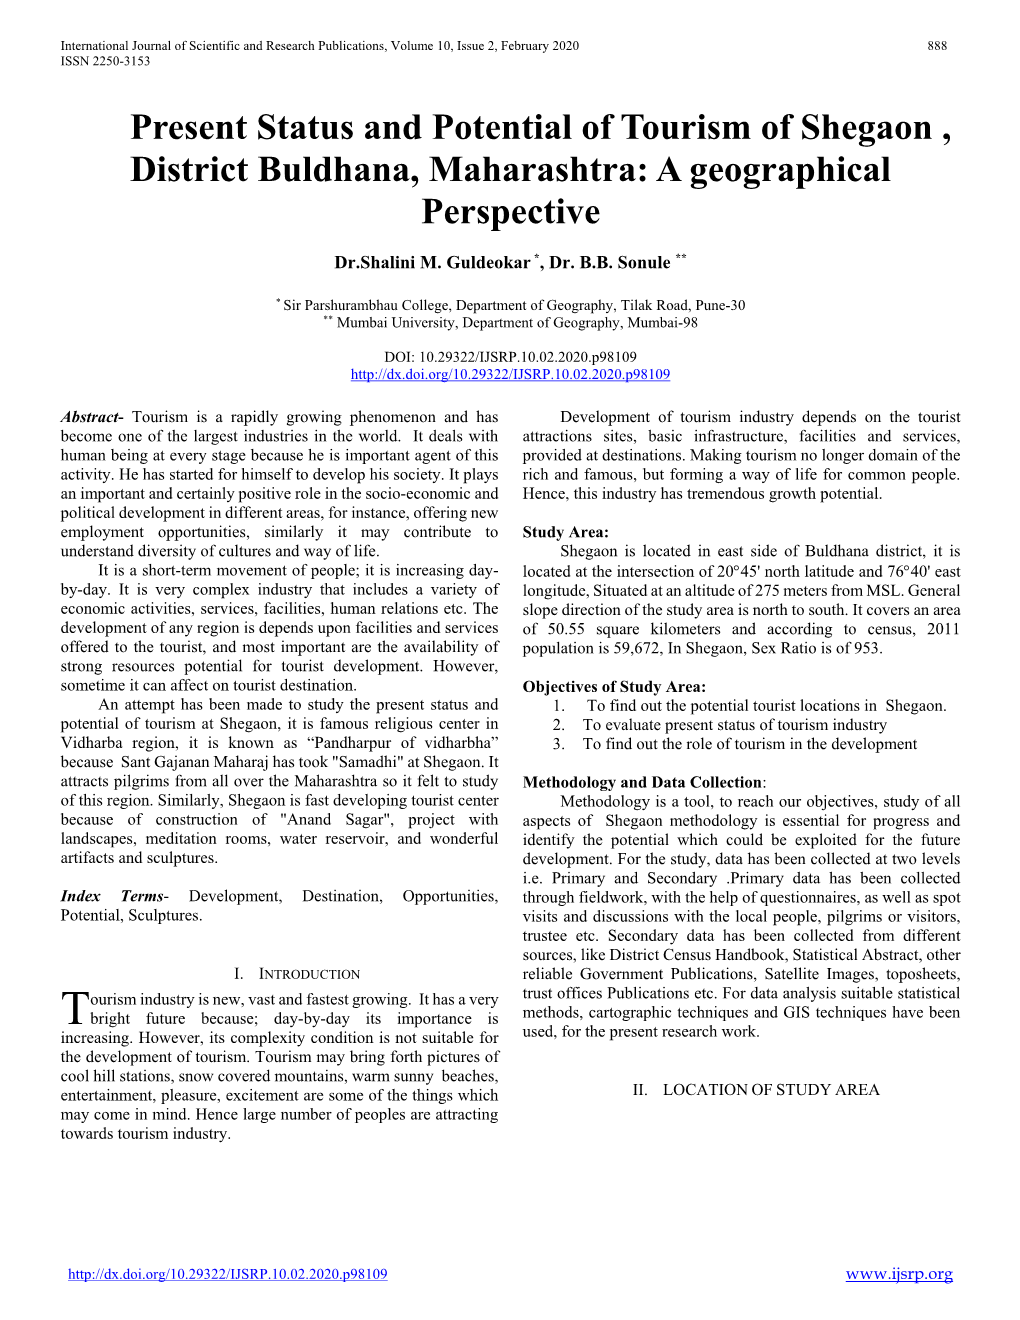 Present Status and Potential of Tourism of Shegaon , District Buldhana, Maharashtra: a Geographical Perspective